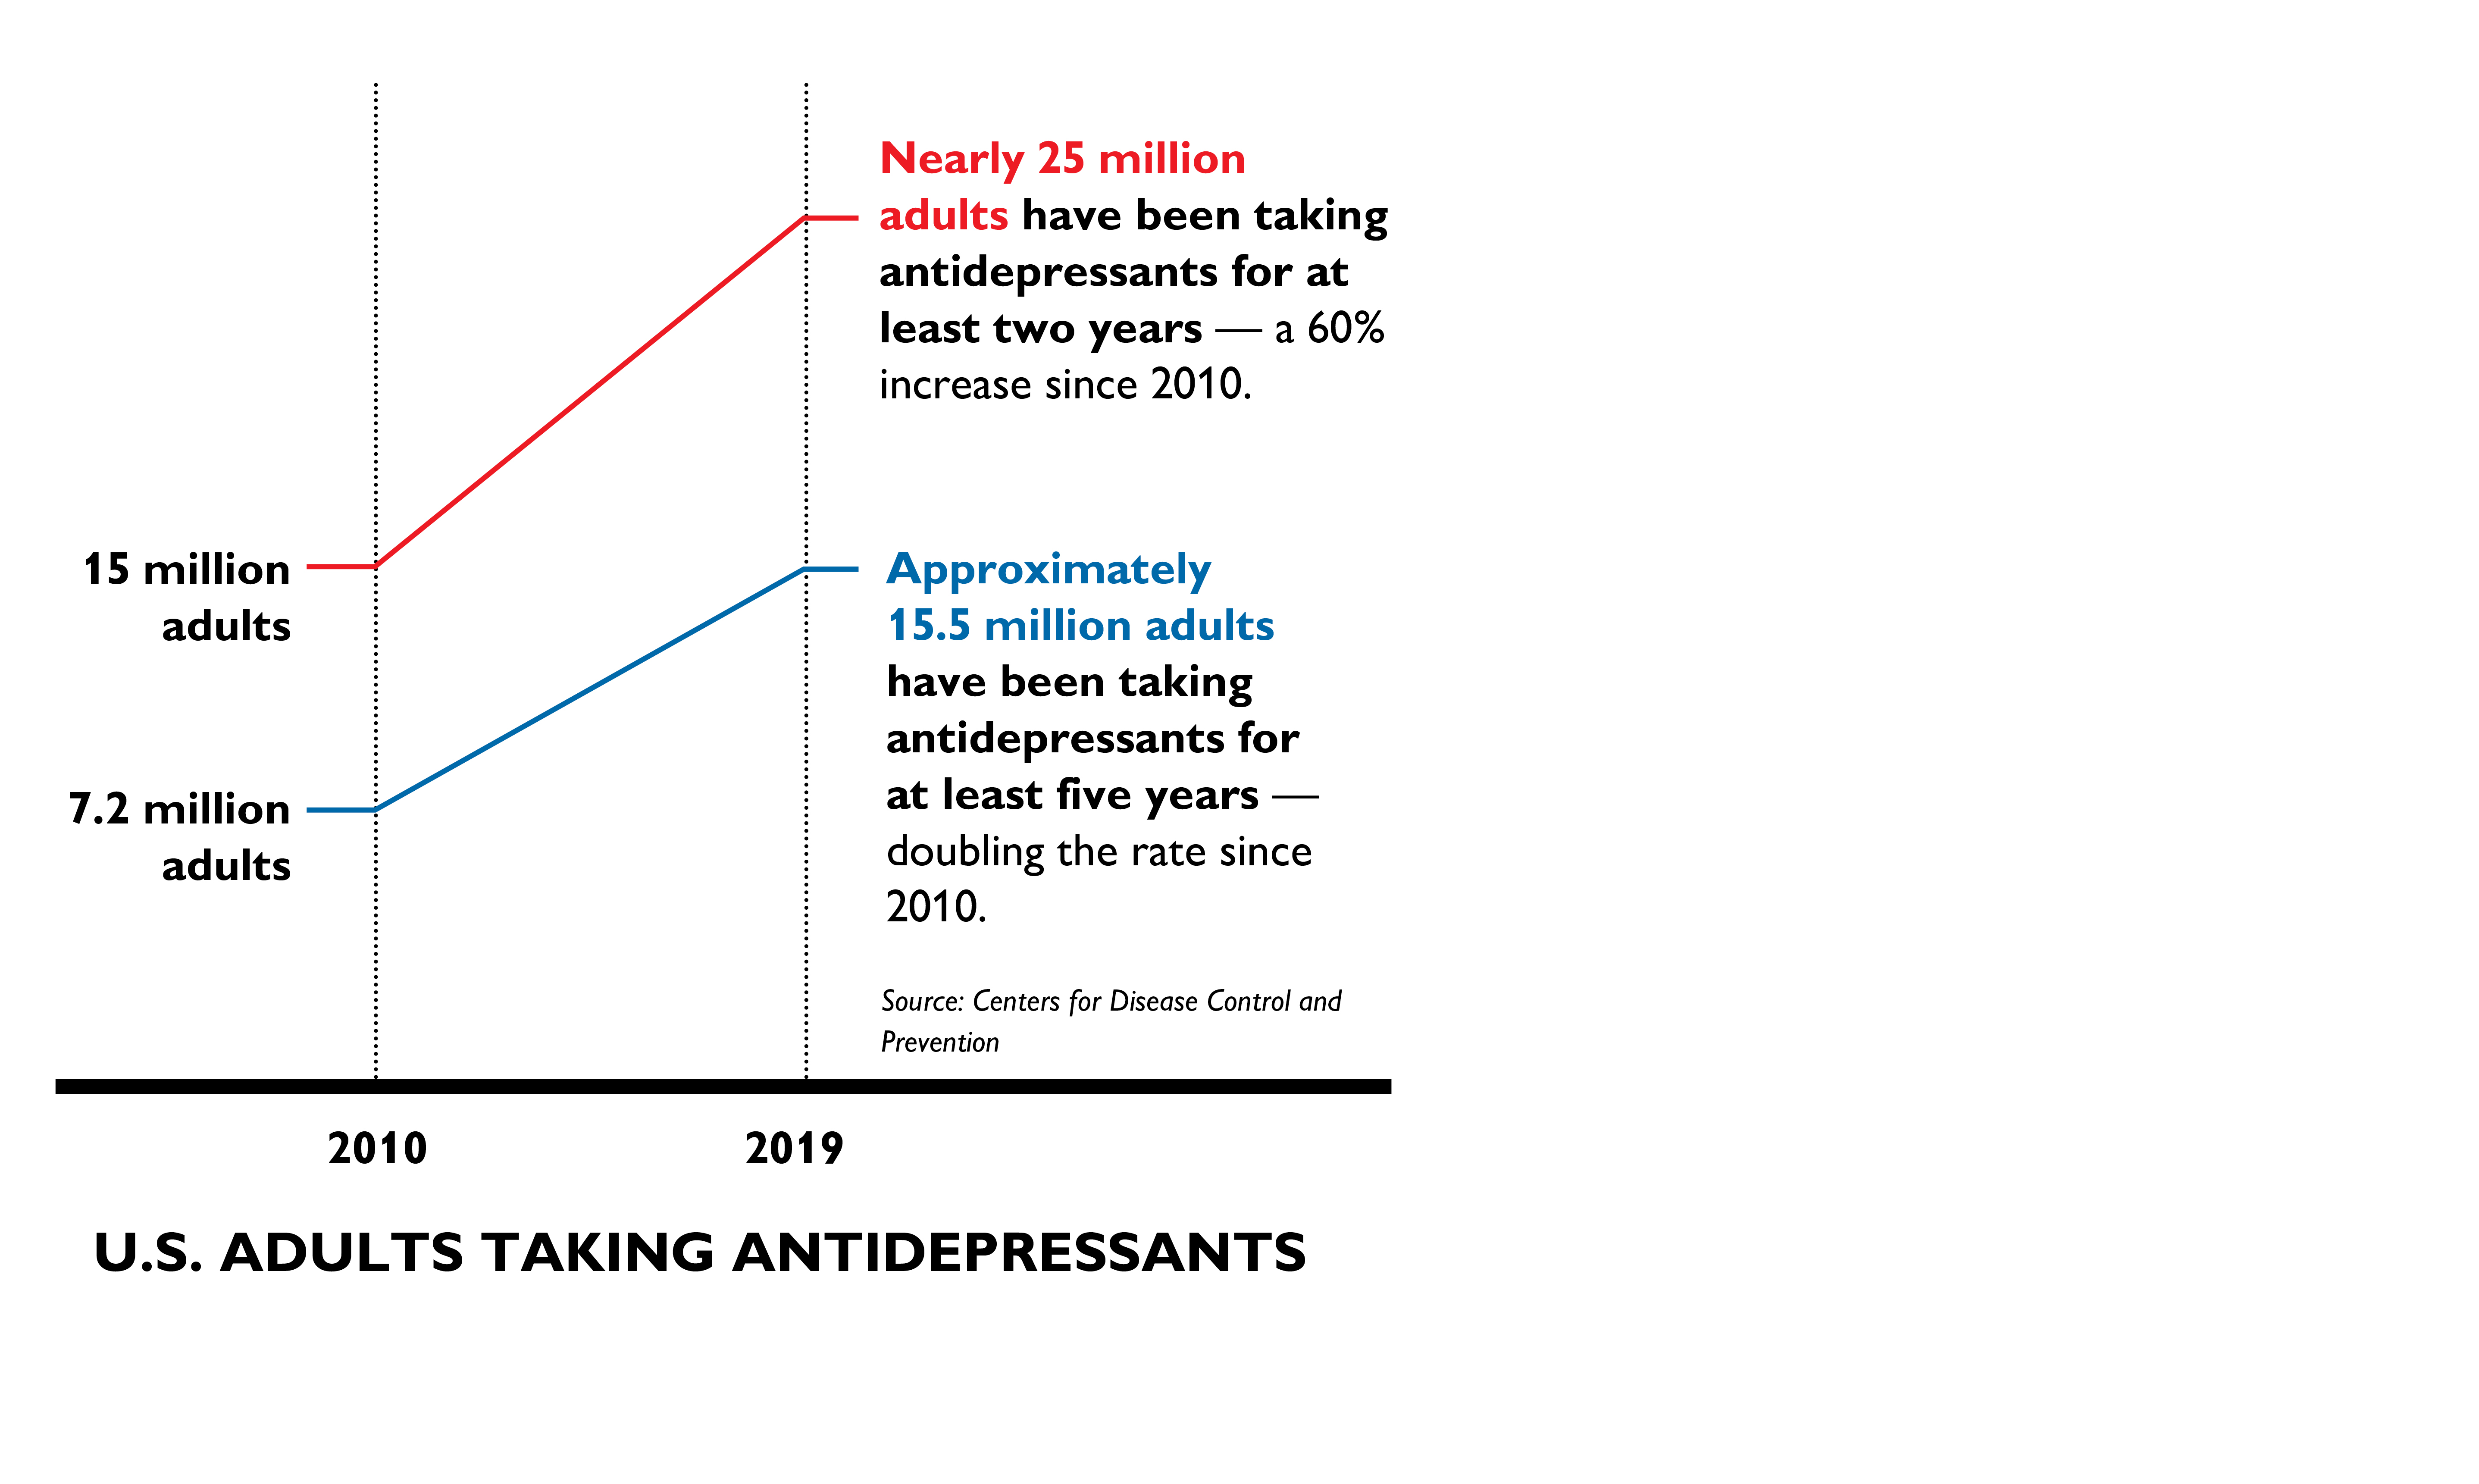 U.S. Adults taking antidepressants15 million adultsNearly 25 million adults have been taking antidepressants for at least two years — a 60% increase since 2010. 7.2 million adultsApproximately 15.5 million adults have been taking antidepressants for at least five years — doubling the rate since 2010. 